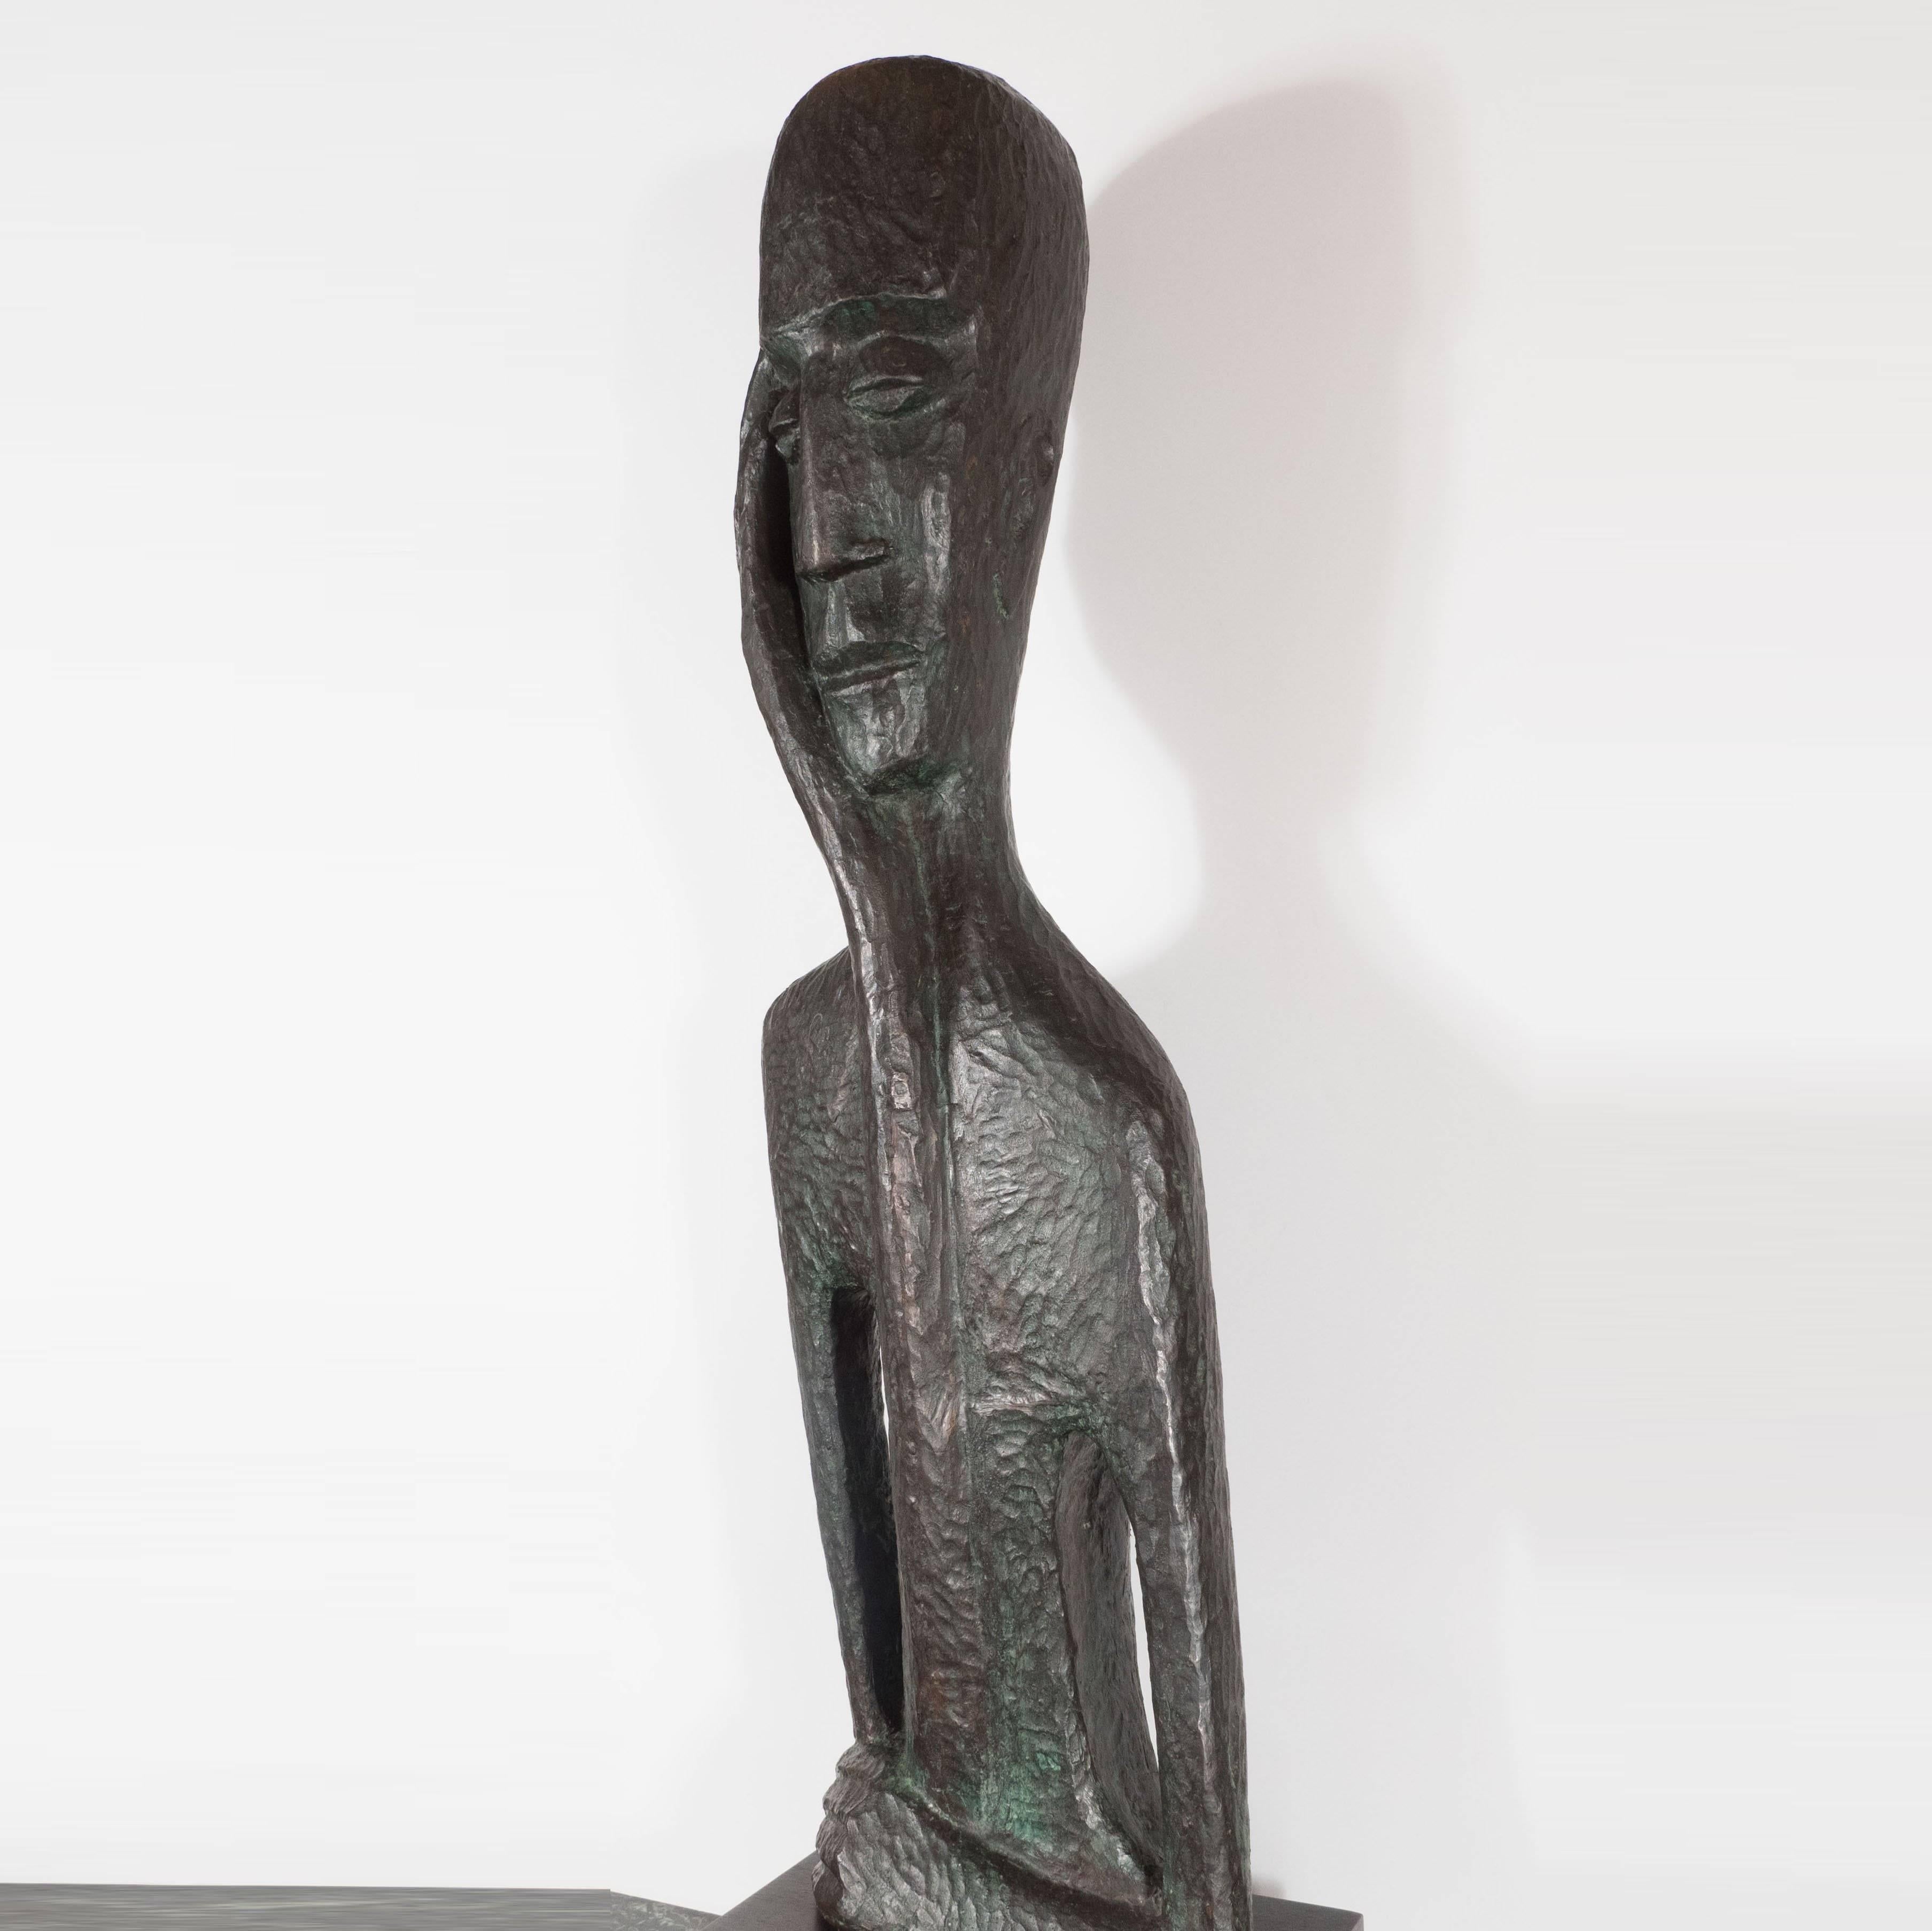 This impressive bronze sculpture was obtained in Israel by a prominent American collector, circa 1975. It presents a stylized male figure with his hand resting against his cheek with his eyes closed in a contemplative expression. The artist has